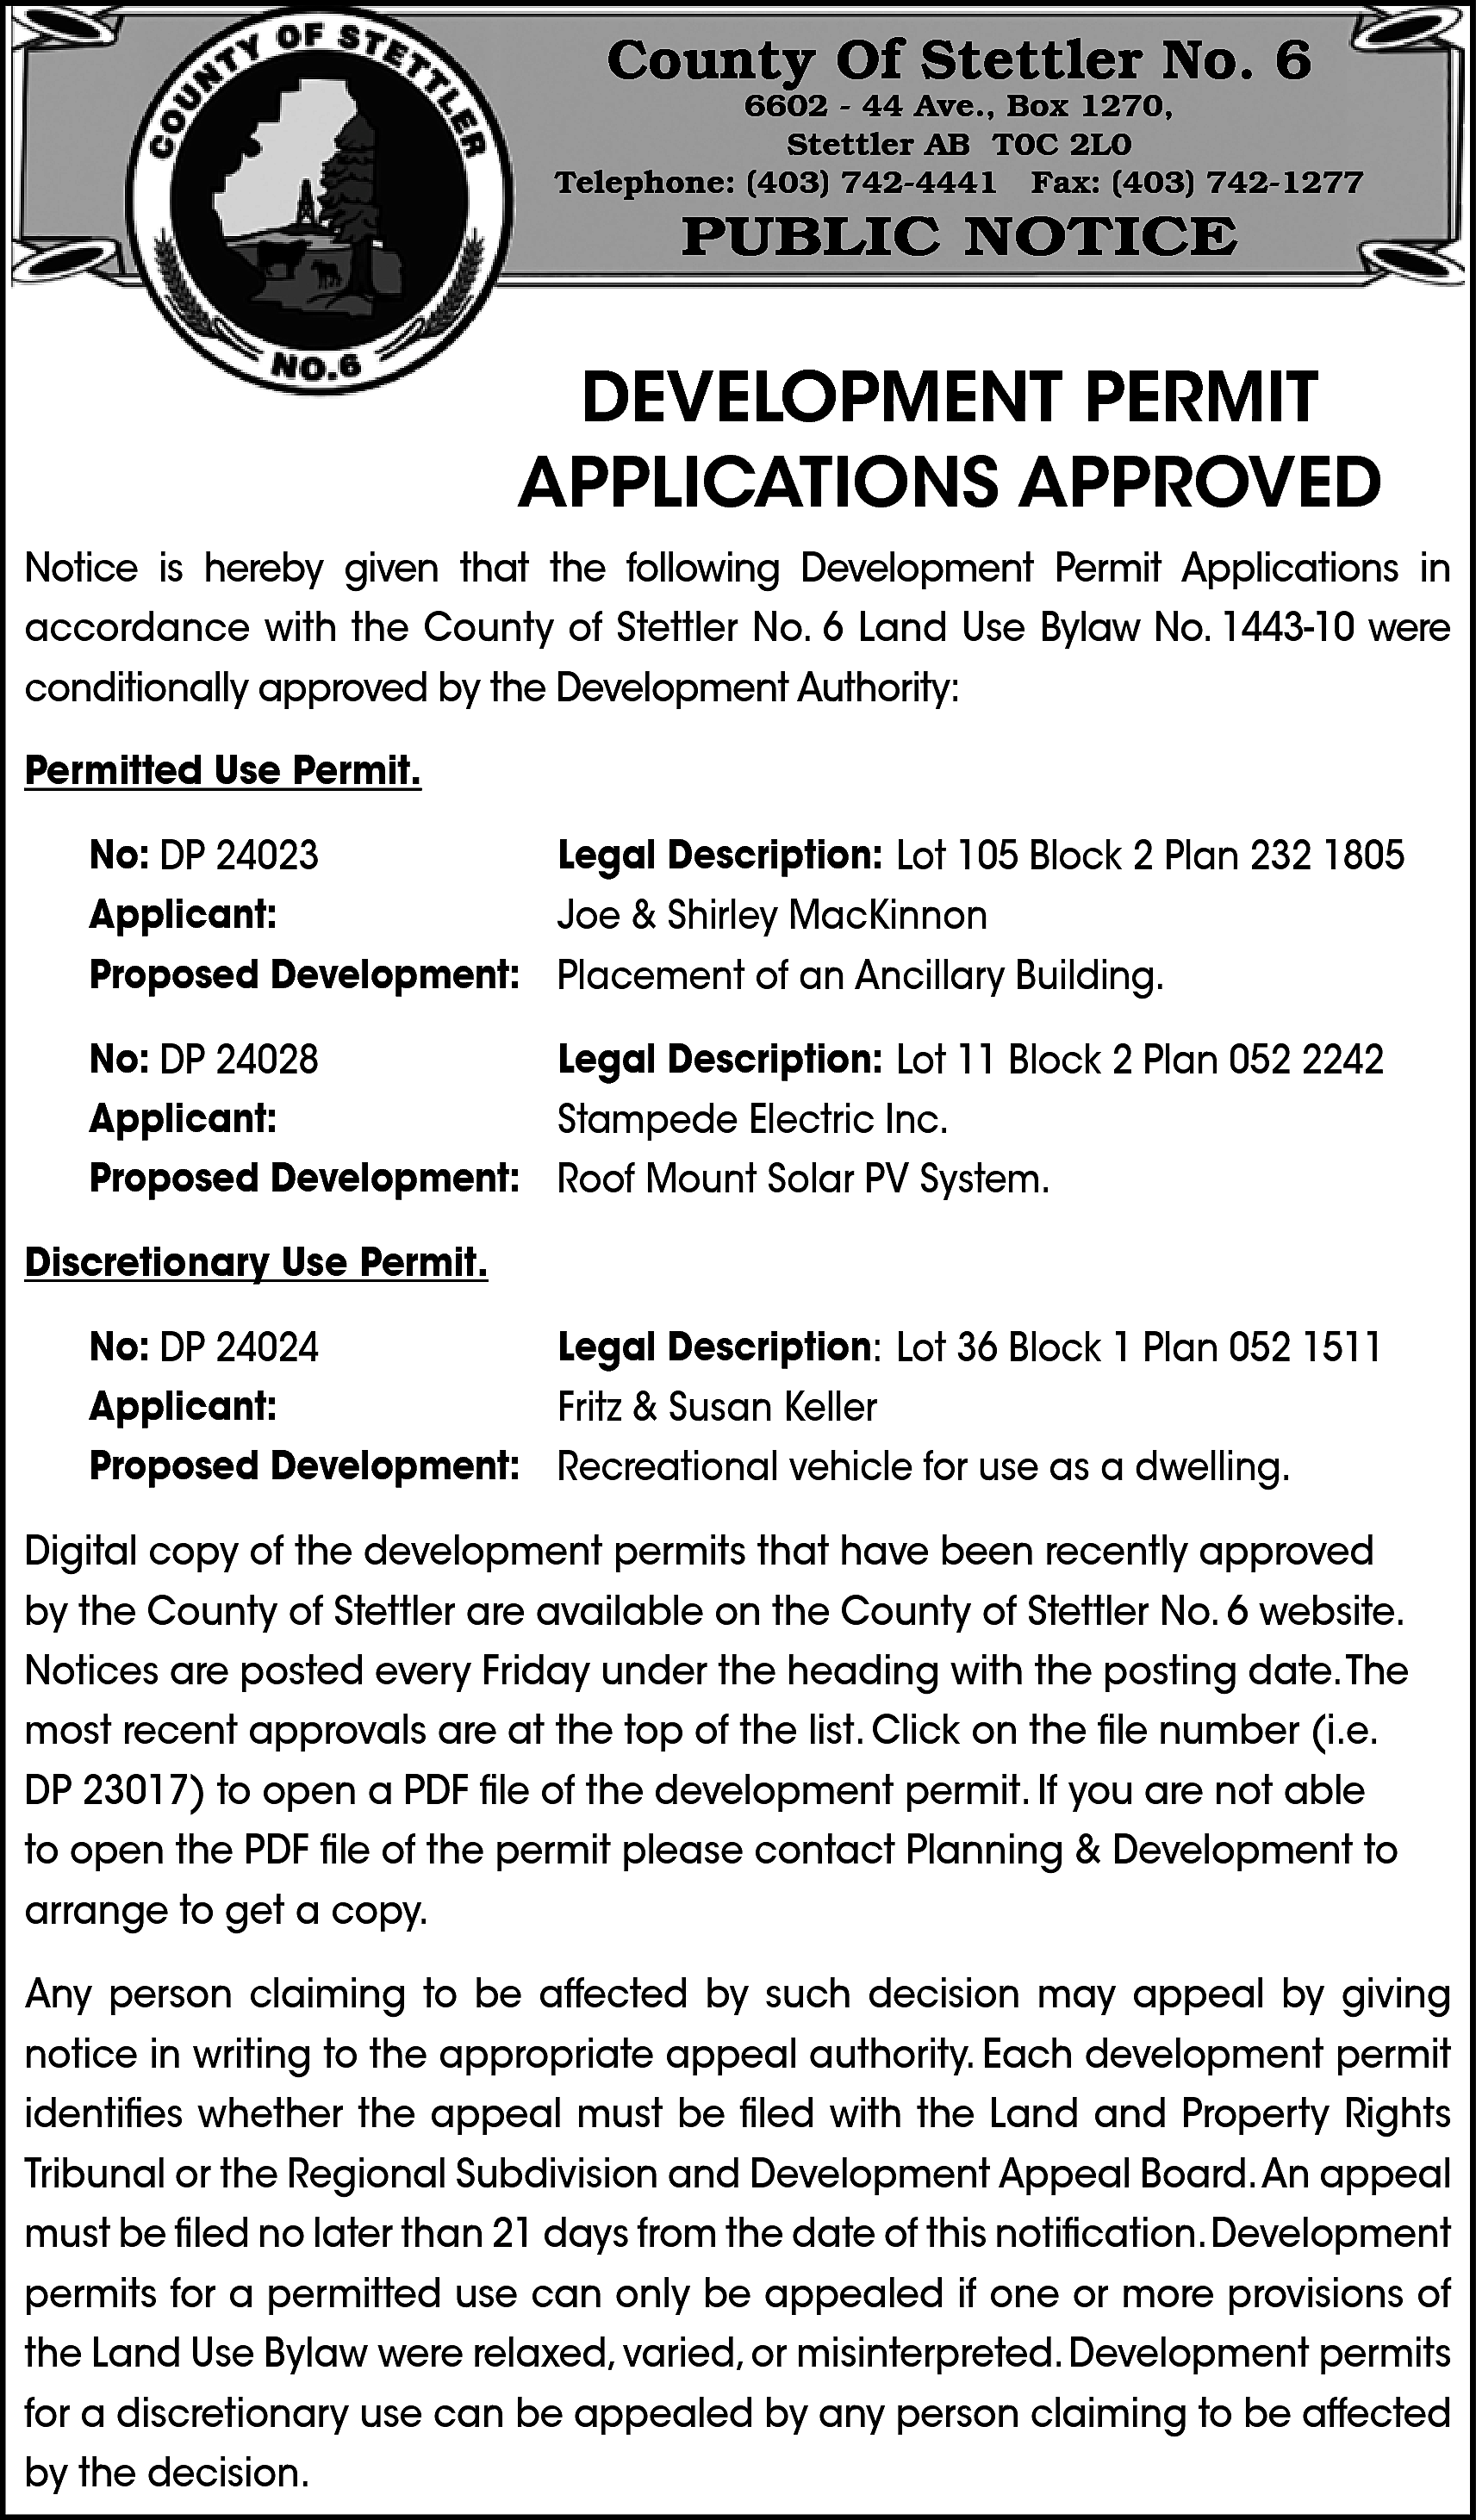 County Of Stettler No. 6  County Of Stettler No. 6    6602 - 44 Ave., Box 1270,  Stettler AB T0C 2L0  Telephone: (403) 742-4441 Fax: (403) 742-1277    PUBLIC NOTICE    DEVELOPMENT PERMIT  APPLICATIONS APPROVED  Notice is hereby given that the following Development Permit Applications in  accordance with the County of Stettler No. 6 Land Use Bylaw No. 1443-10 were  conditionally approved by the Development Authority:  Permitted Use Permit.  No: DP 24023  Legal Description: Lot 105 Block 2 Plan 232 1805  Applicant:  Joe & Shirley MacKinnon  Proposed Development: Placement of an Ancillary Building.  No: DP 24028  Legal Description: Lot 11 Block 2 Plan 052 2242  Applicant:  Stampede Electric Inc.  Proposed Development: Roof Mount Solar PV System.  Discretionary Use Permit.  No: DP 24024  Legal Description: Lot 36 Block 1 Plan 052 1511  Applicant:  Fritz & Susan Keller  Proposed Development: Recreational vehicle for use as a dwelling.  Digital copy of the development permits that have been recently approved  by the County of Stettler are available on the County of Stettler No. 6 website.  Notices are posted every Friday under the heading with the posting date.The  most recent approvals are at the top of the list. Click on the file number (i.e.  DP 23017) to open a PDF file of the development permit. If you are not able  to open the PDF file of the permit please contact Planning & Development to  arrange to get a copy.  Any person claiming to be affected by such decision may appeal by giving  notice in writing to the appropriate appeal authority. Each development permit  identifies whether the appeal must be filed with the Land and Property Rights  Tribunal or the Regional Subdivision and Development Appeal Board.An appeal  must be filed no later than 21 days from the date of this notification.Development  permits for a permitted use can only be appealed if one or more provisions of  the Land Use Bylaw were relaxed, varied, or misinterpreted. Development permits  for a discretionary use can be appealed by any person claiming to be affected  by the decision.    